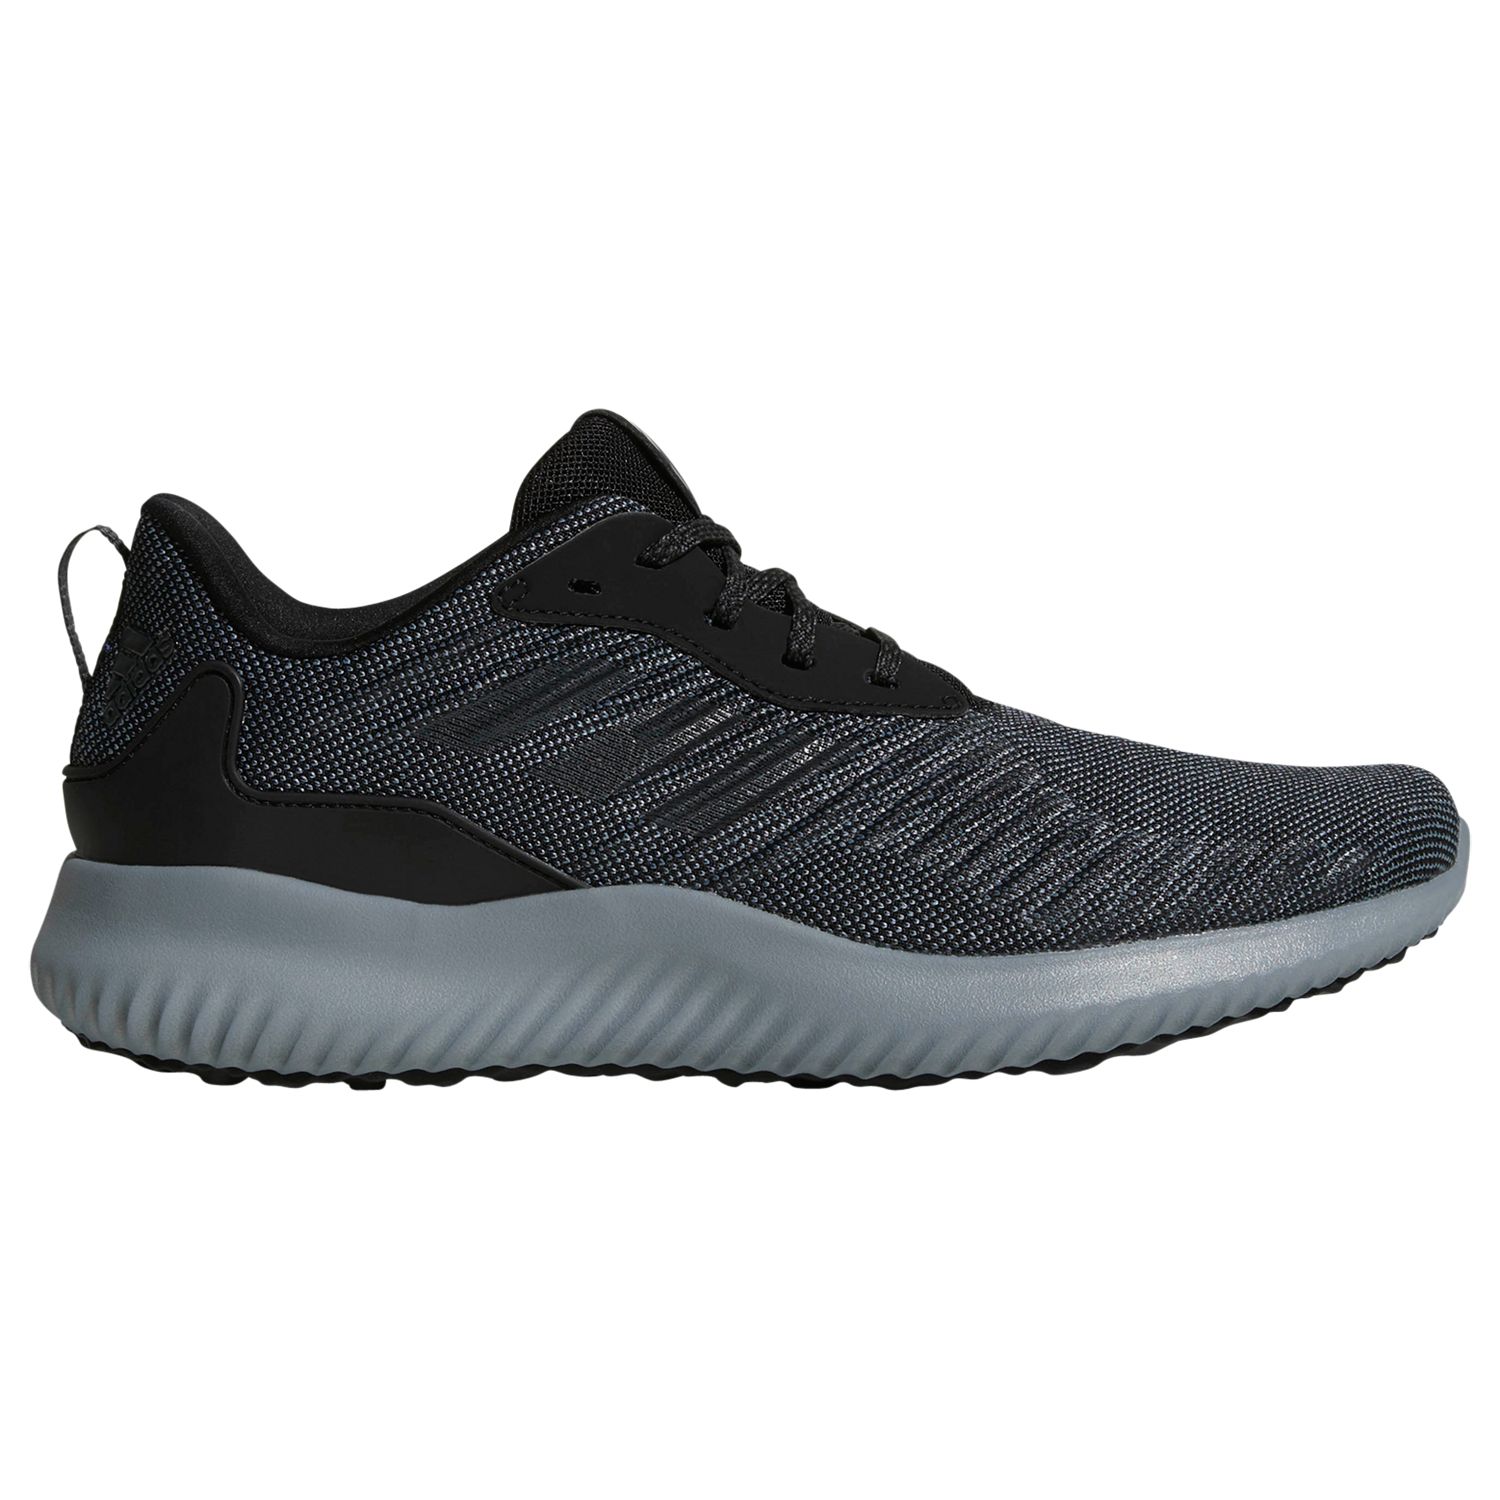 adidas Alphabounce RC Men's Running Shoes, Black, 10